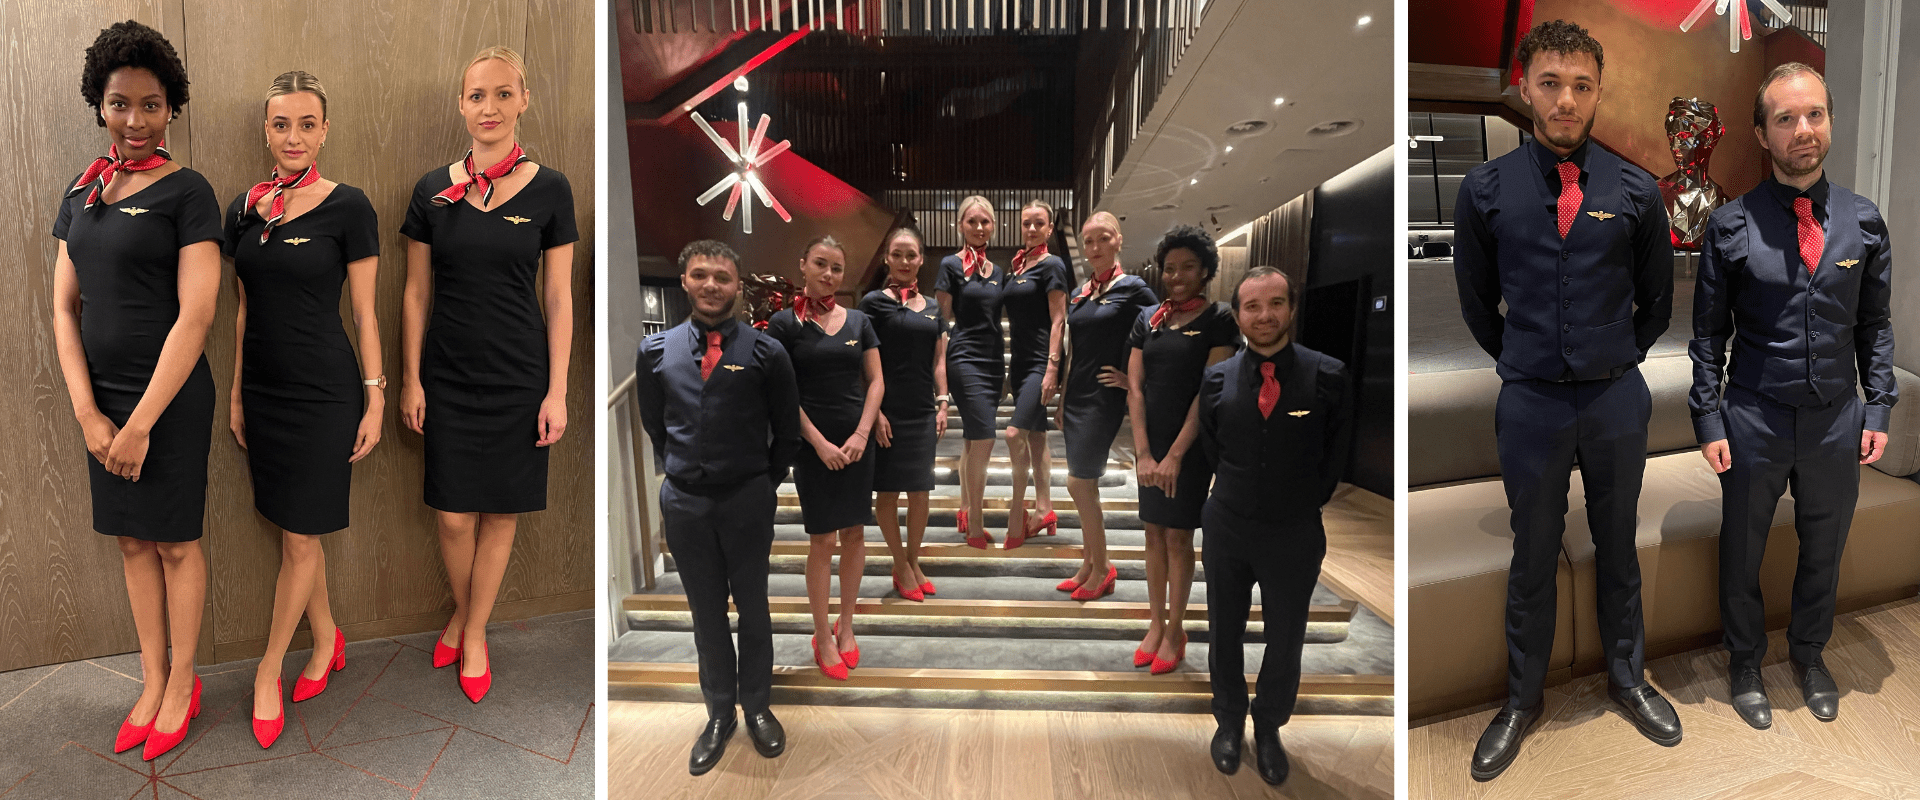 World Duty Free event hostesses at The Londoner Hotel